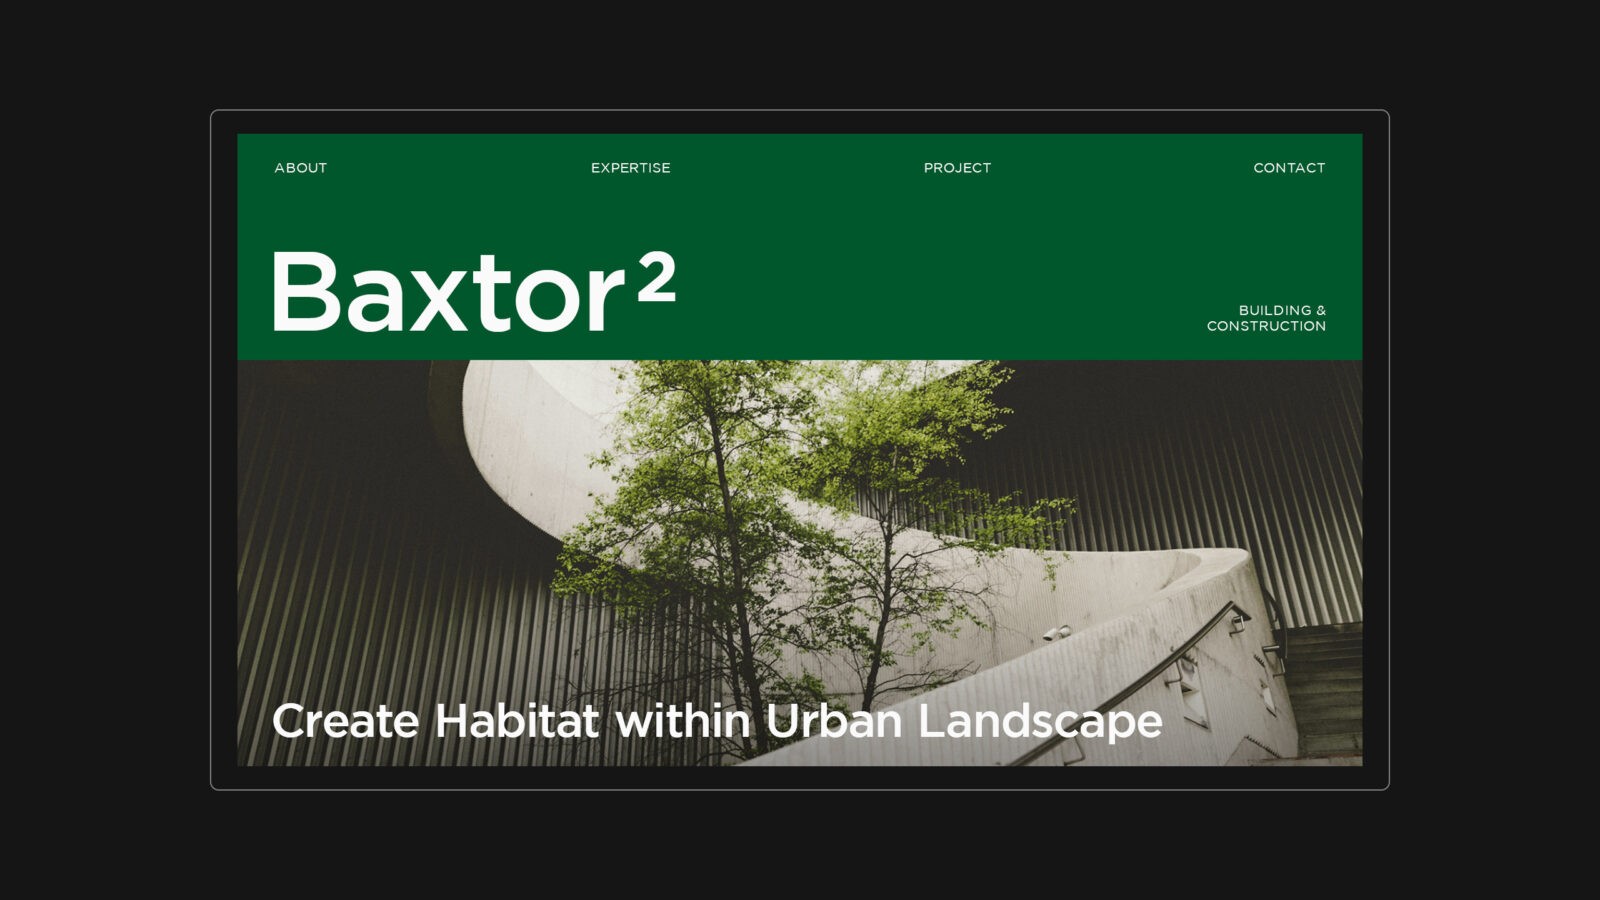 Baxtor² Partners with Chídr Design Studio to Translate Their Harmonious Human-eco Vision Into a Compelling Brand Identity